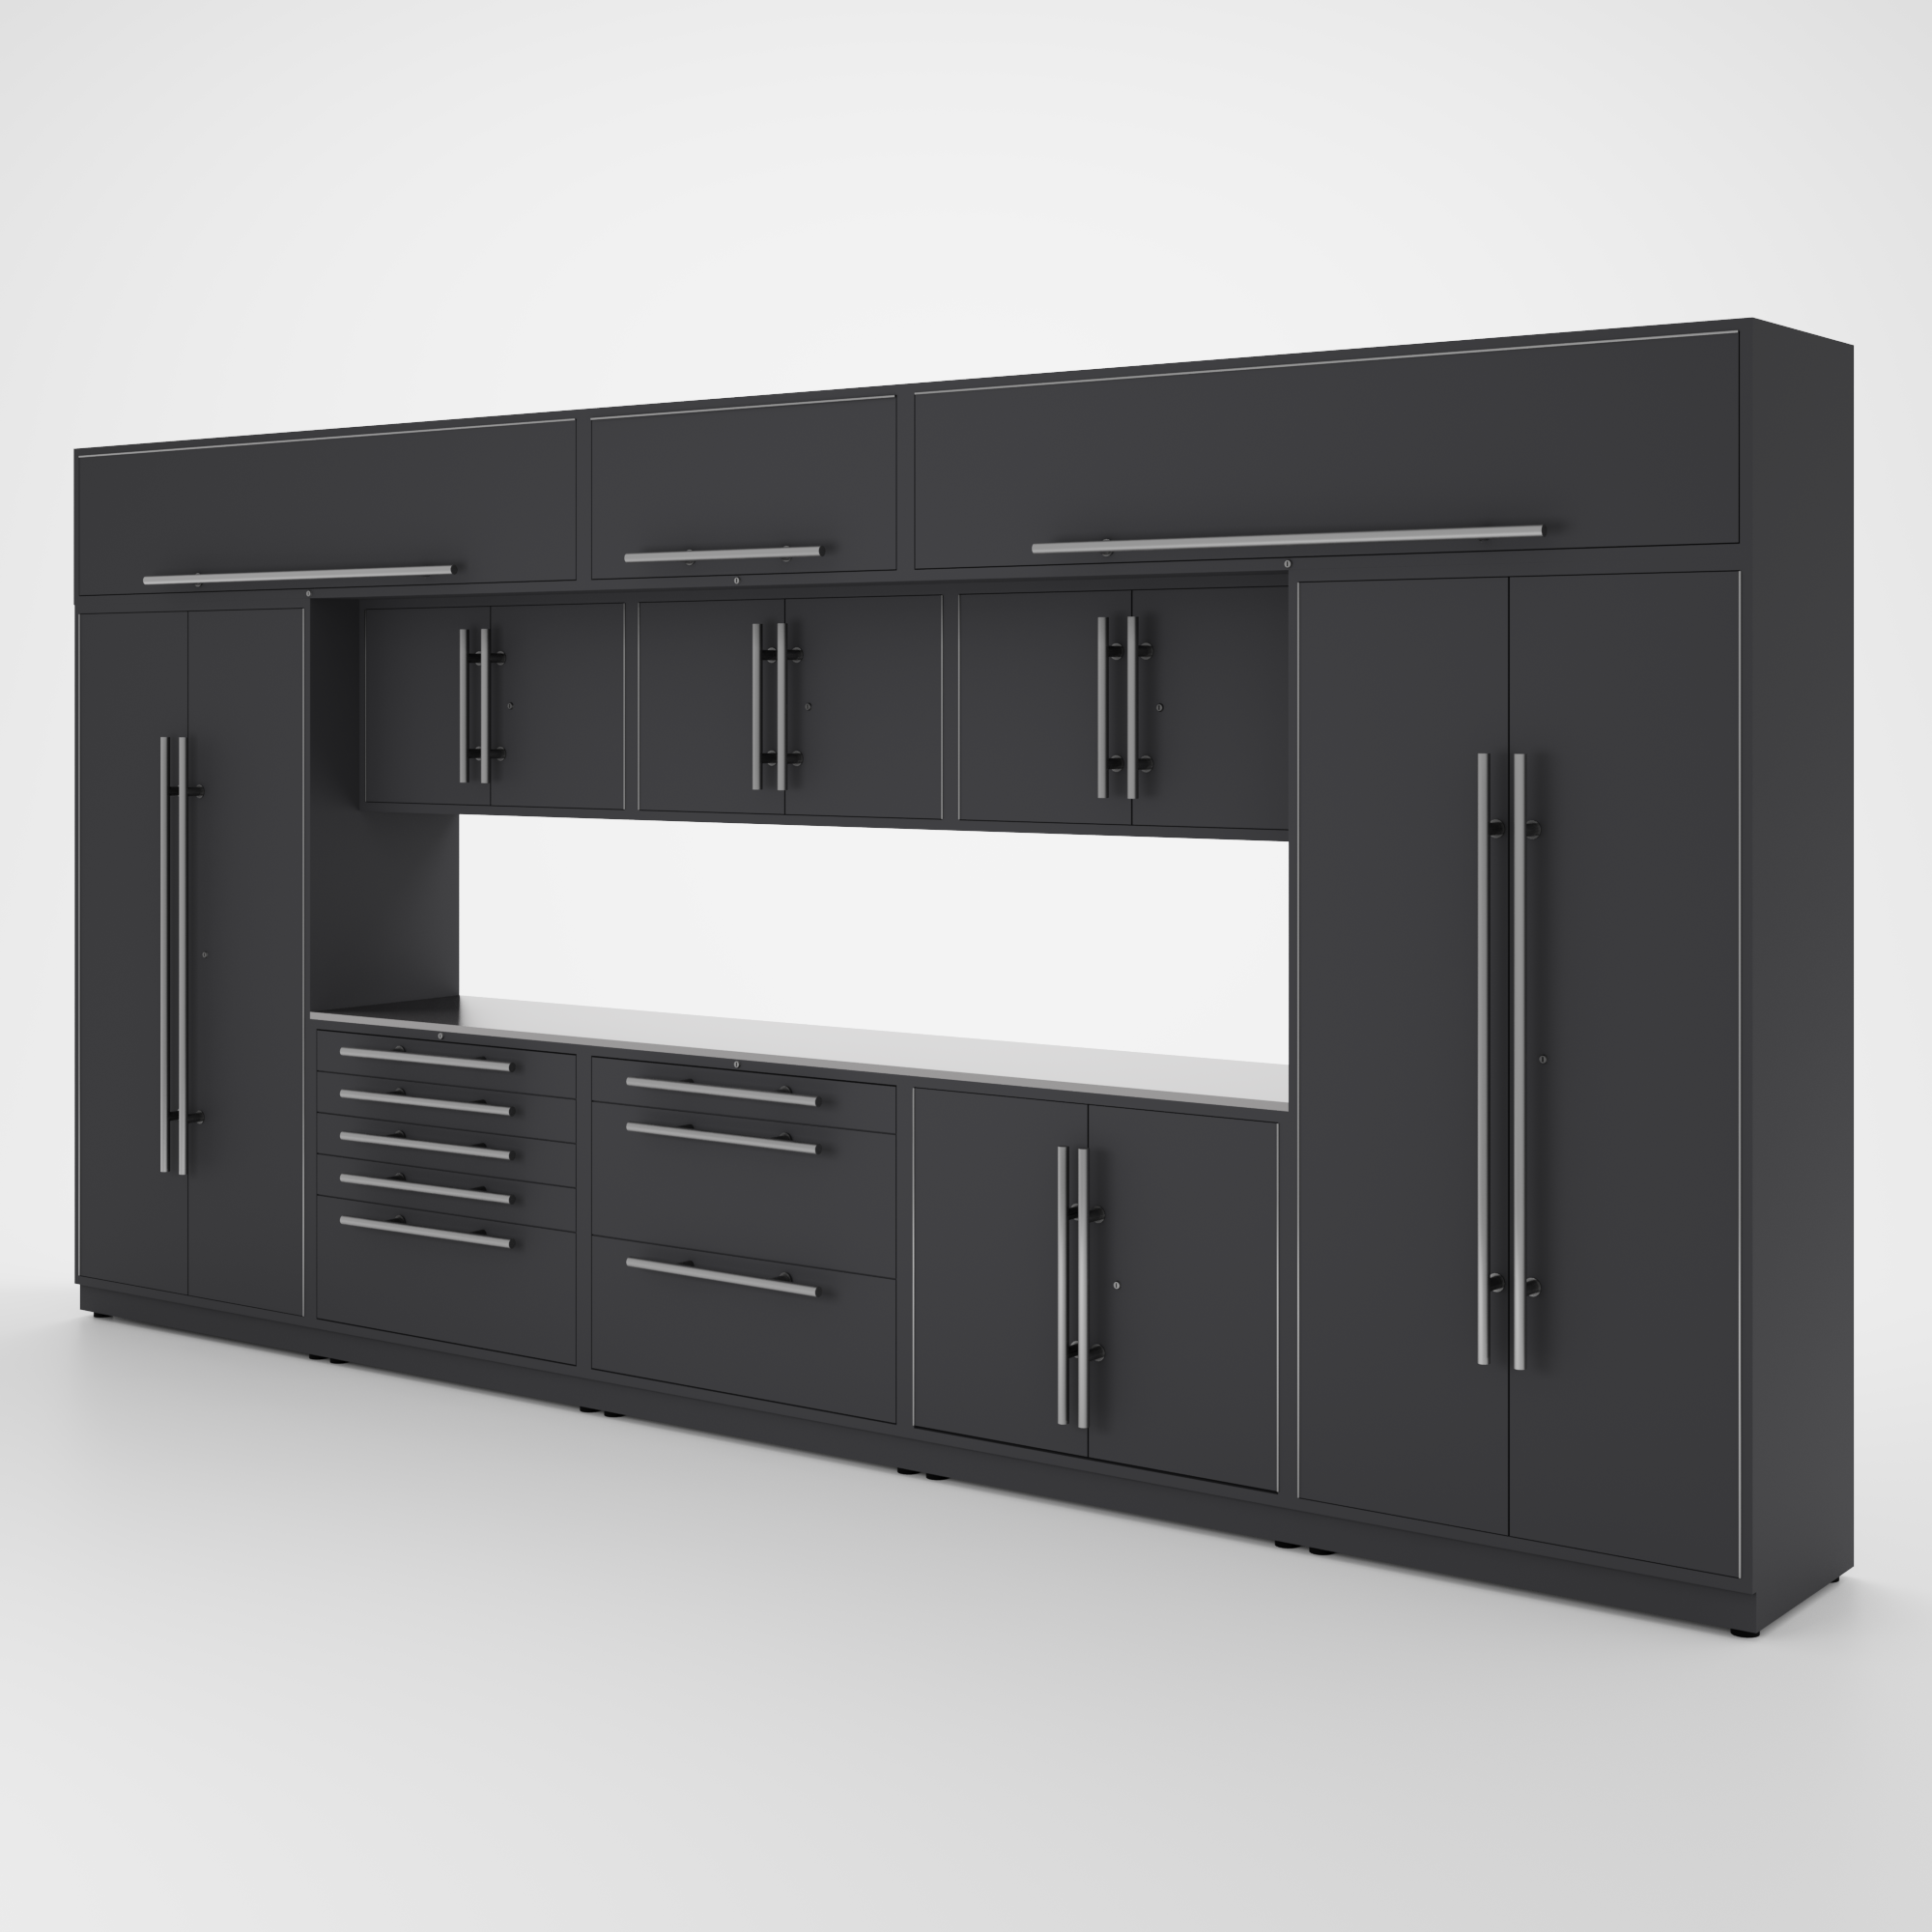 LUX Cabinets – 16 ft set – MAX – Overheads